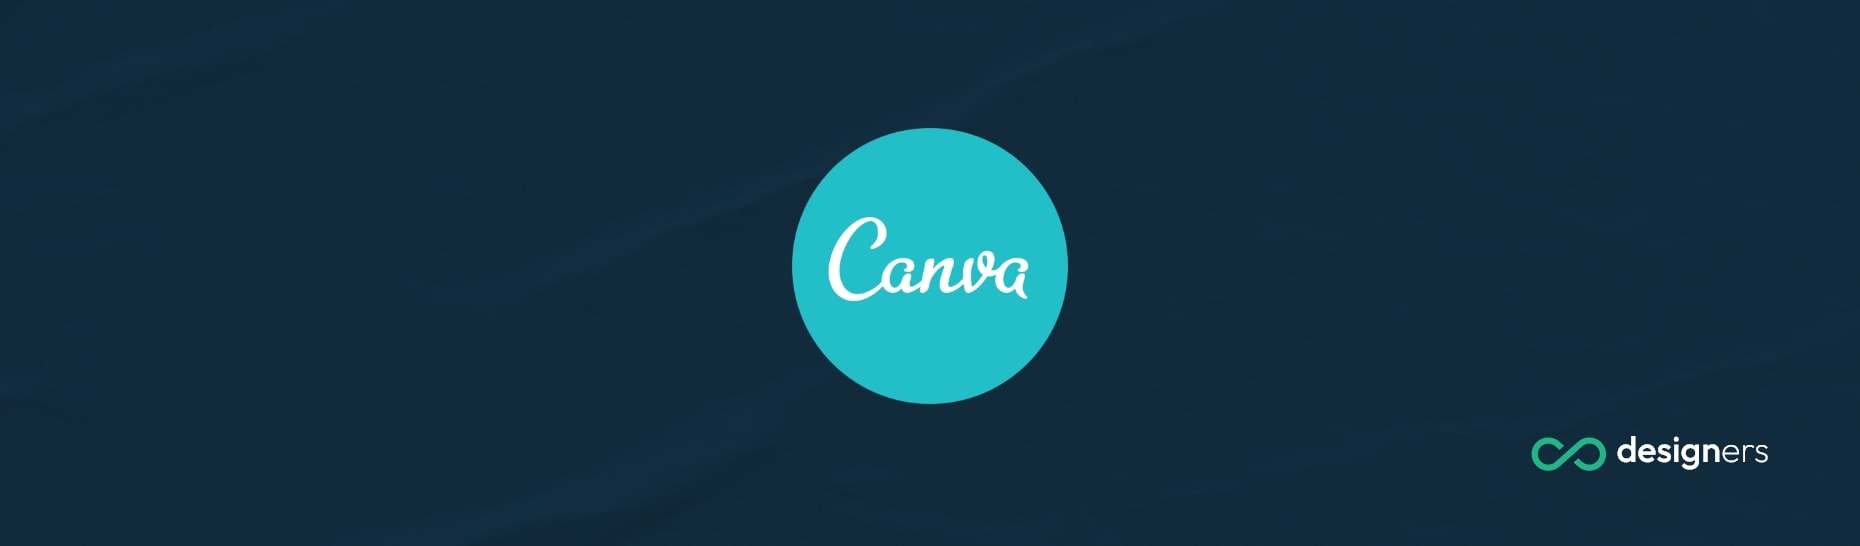 Why Is Canva So Slow?